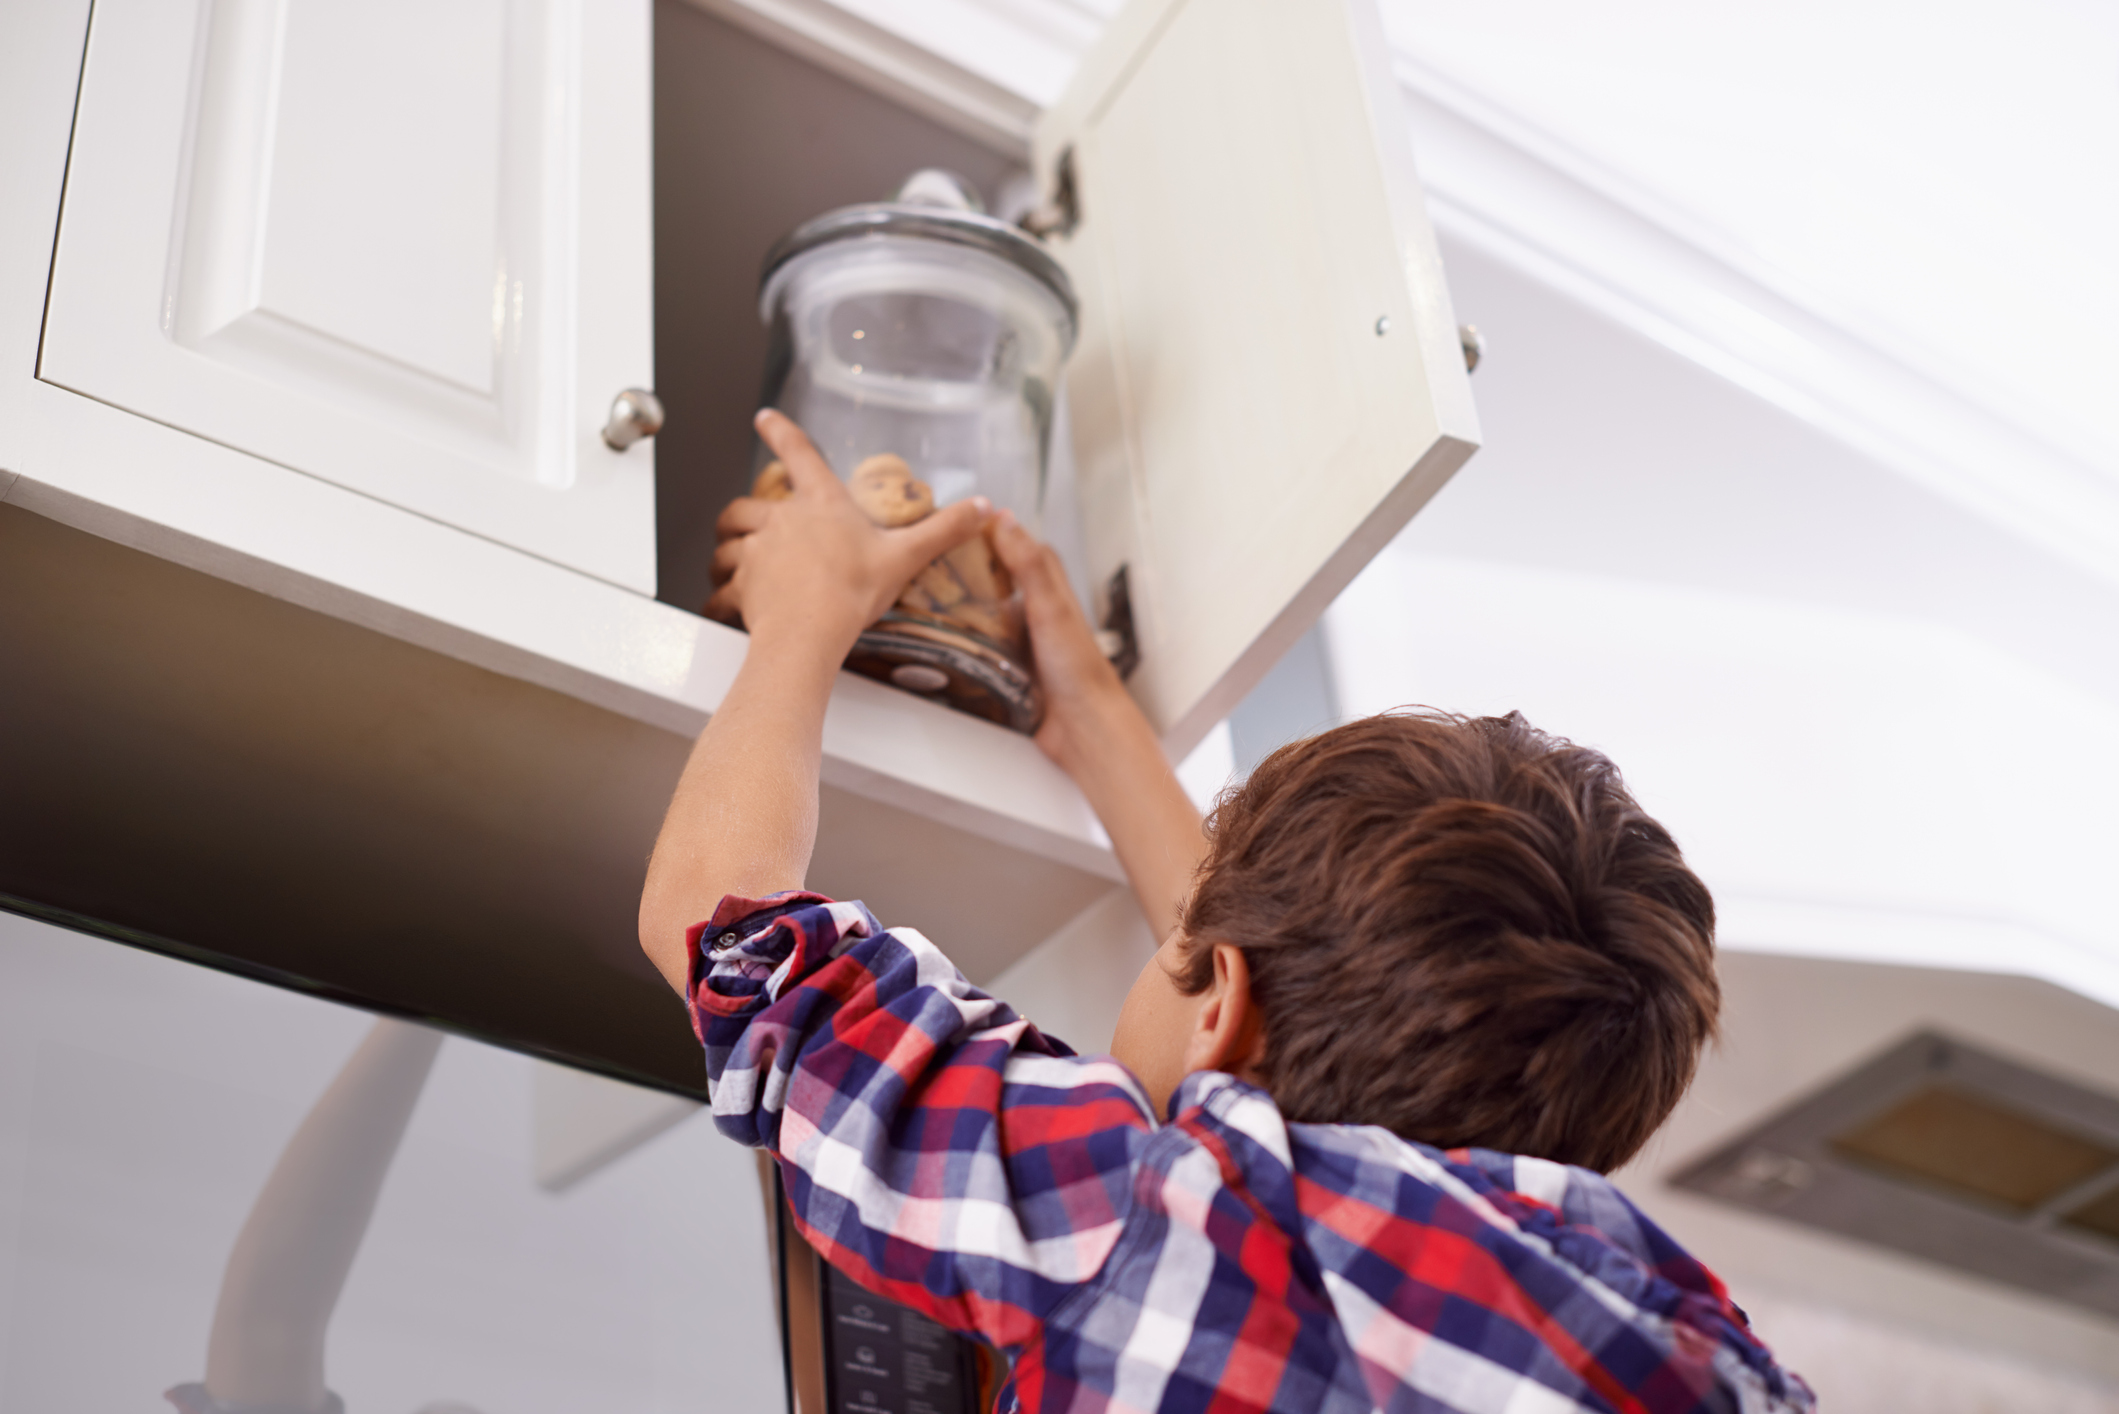 A young boy reaching for a cookie jar in the top kitchen cupboard